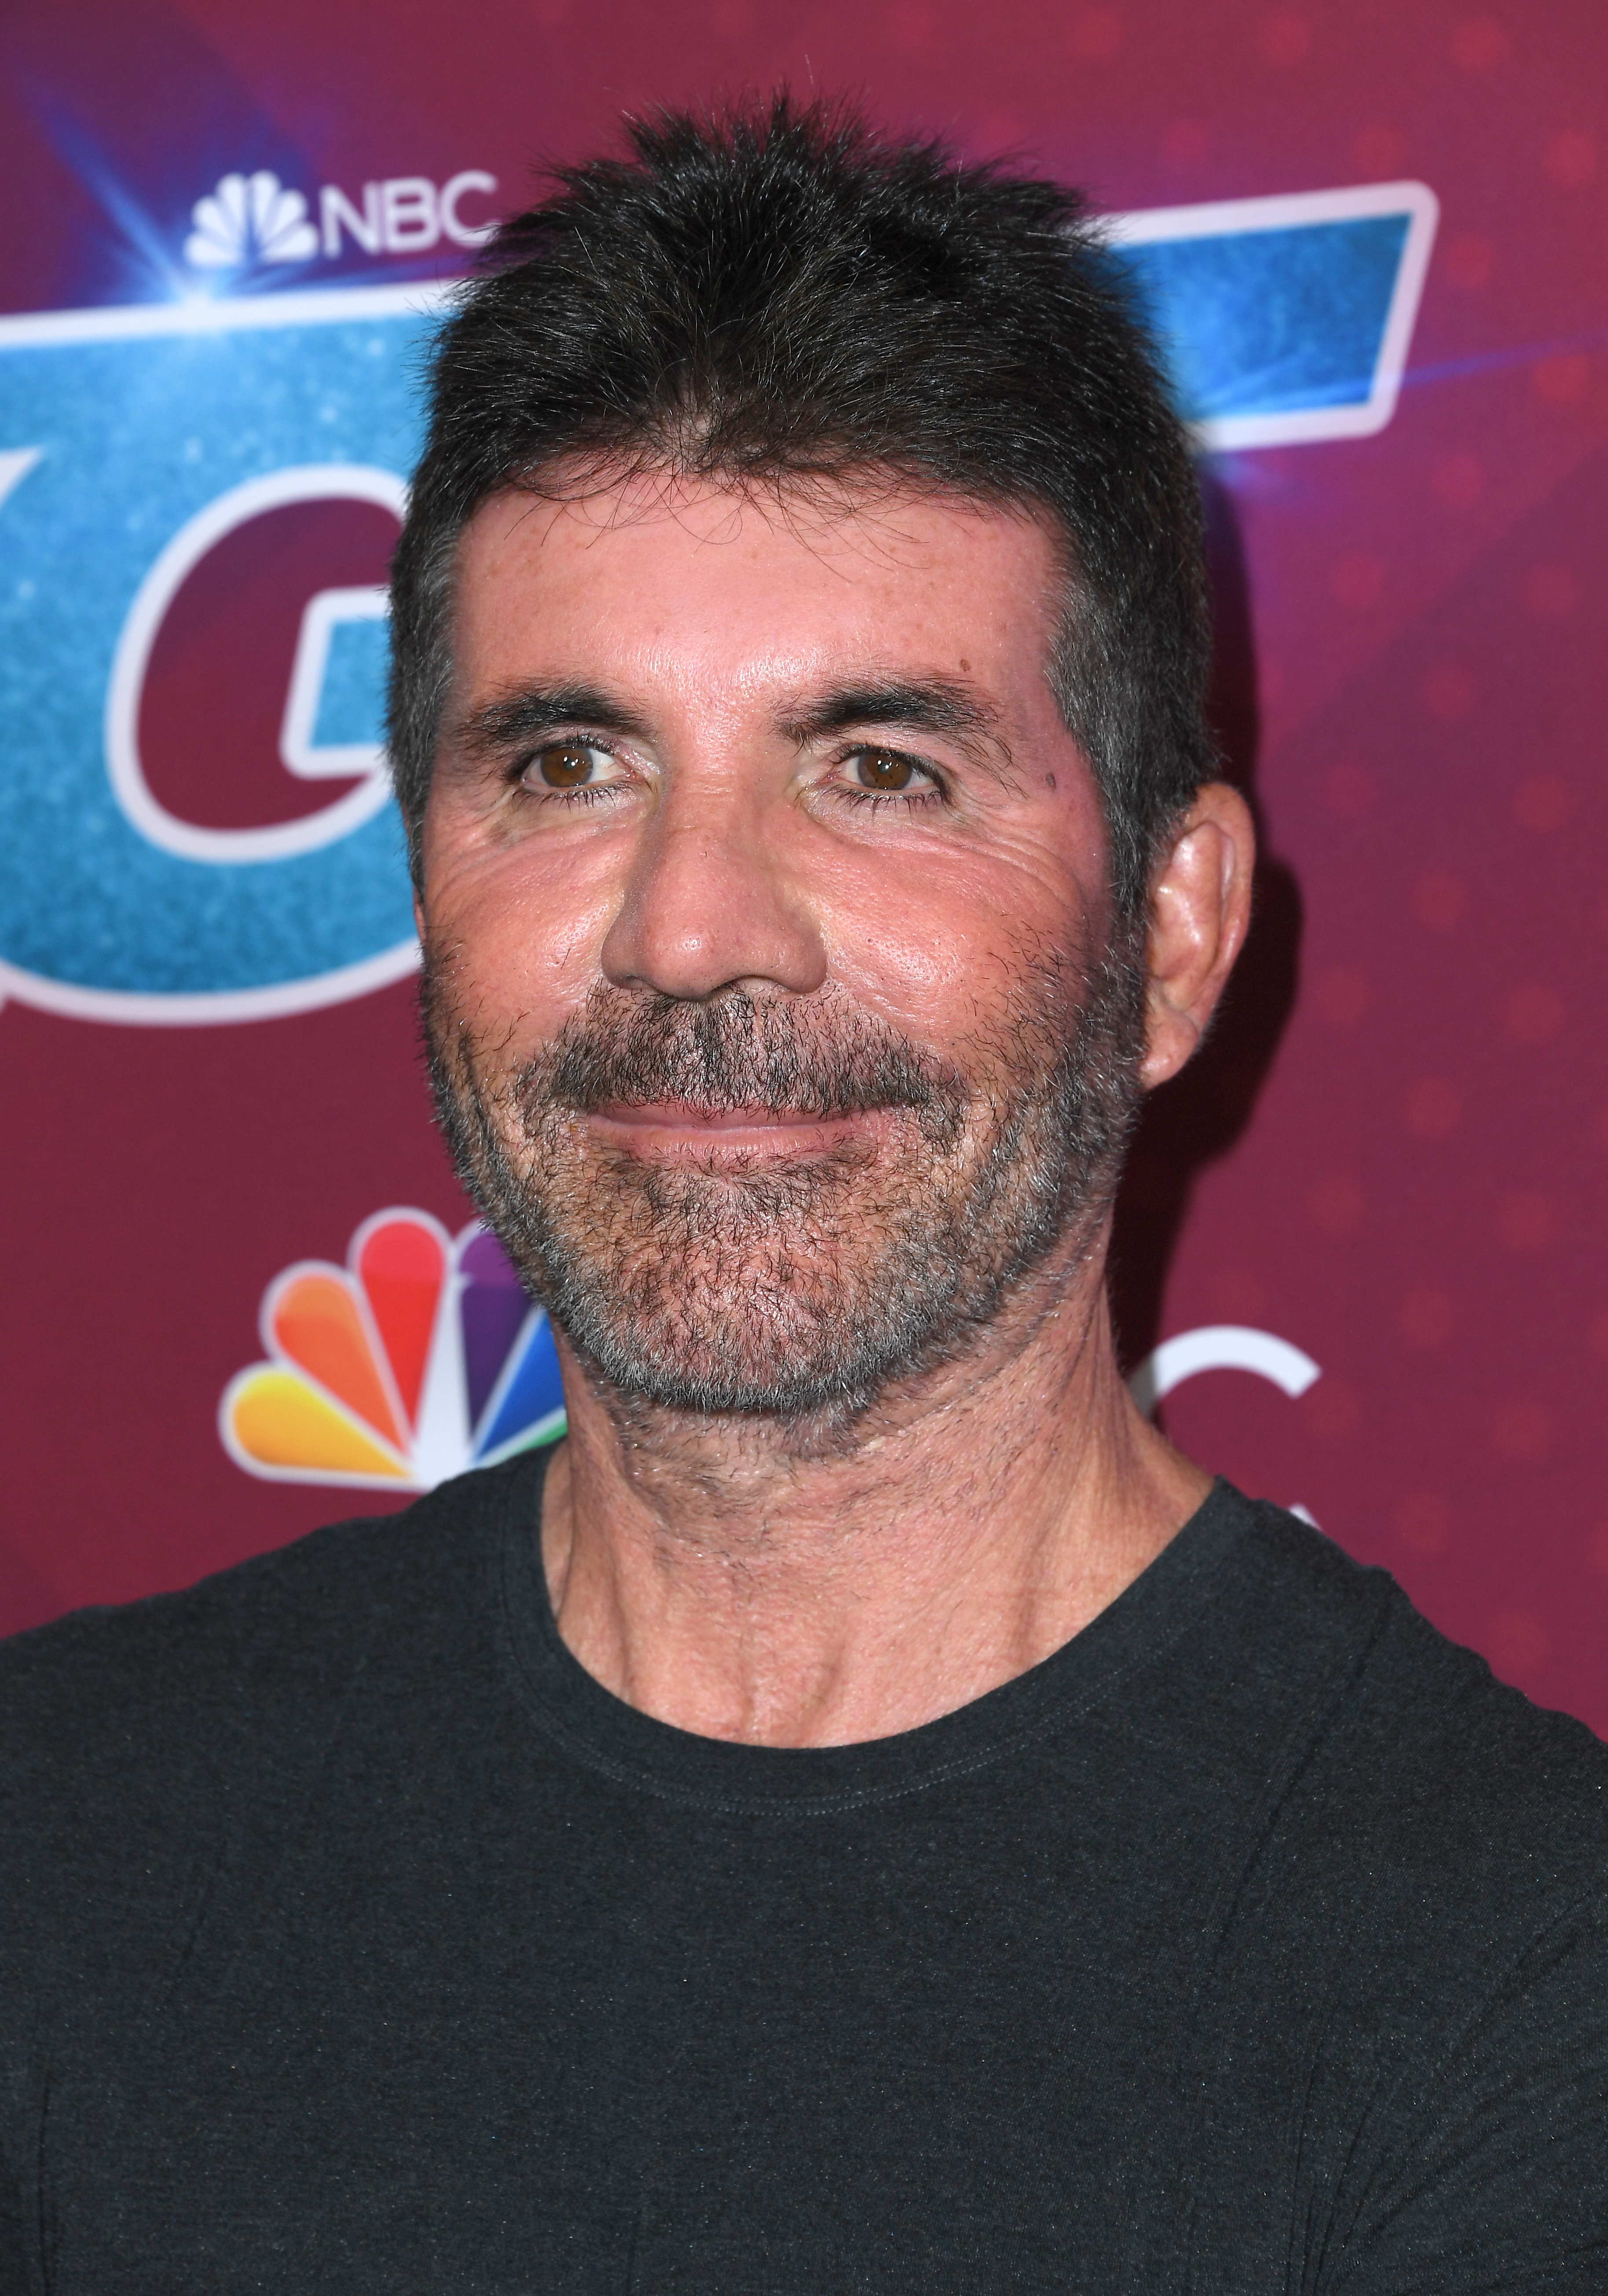 Simon Cowell ar at the Red Carpet For "America's Got Talent" in California in 2022 | Source: Getty images